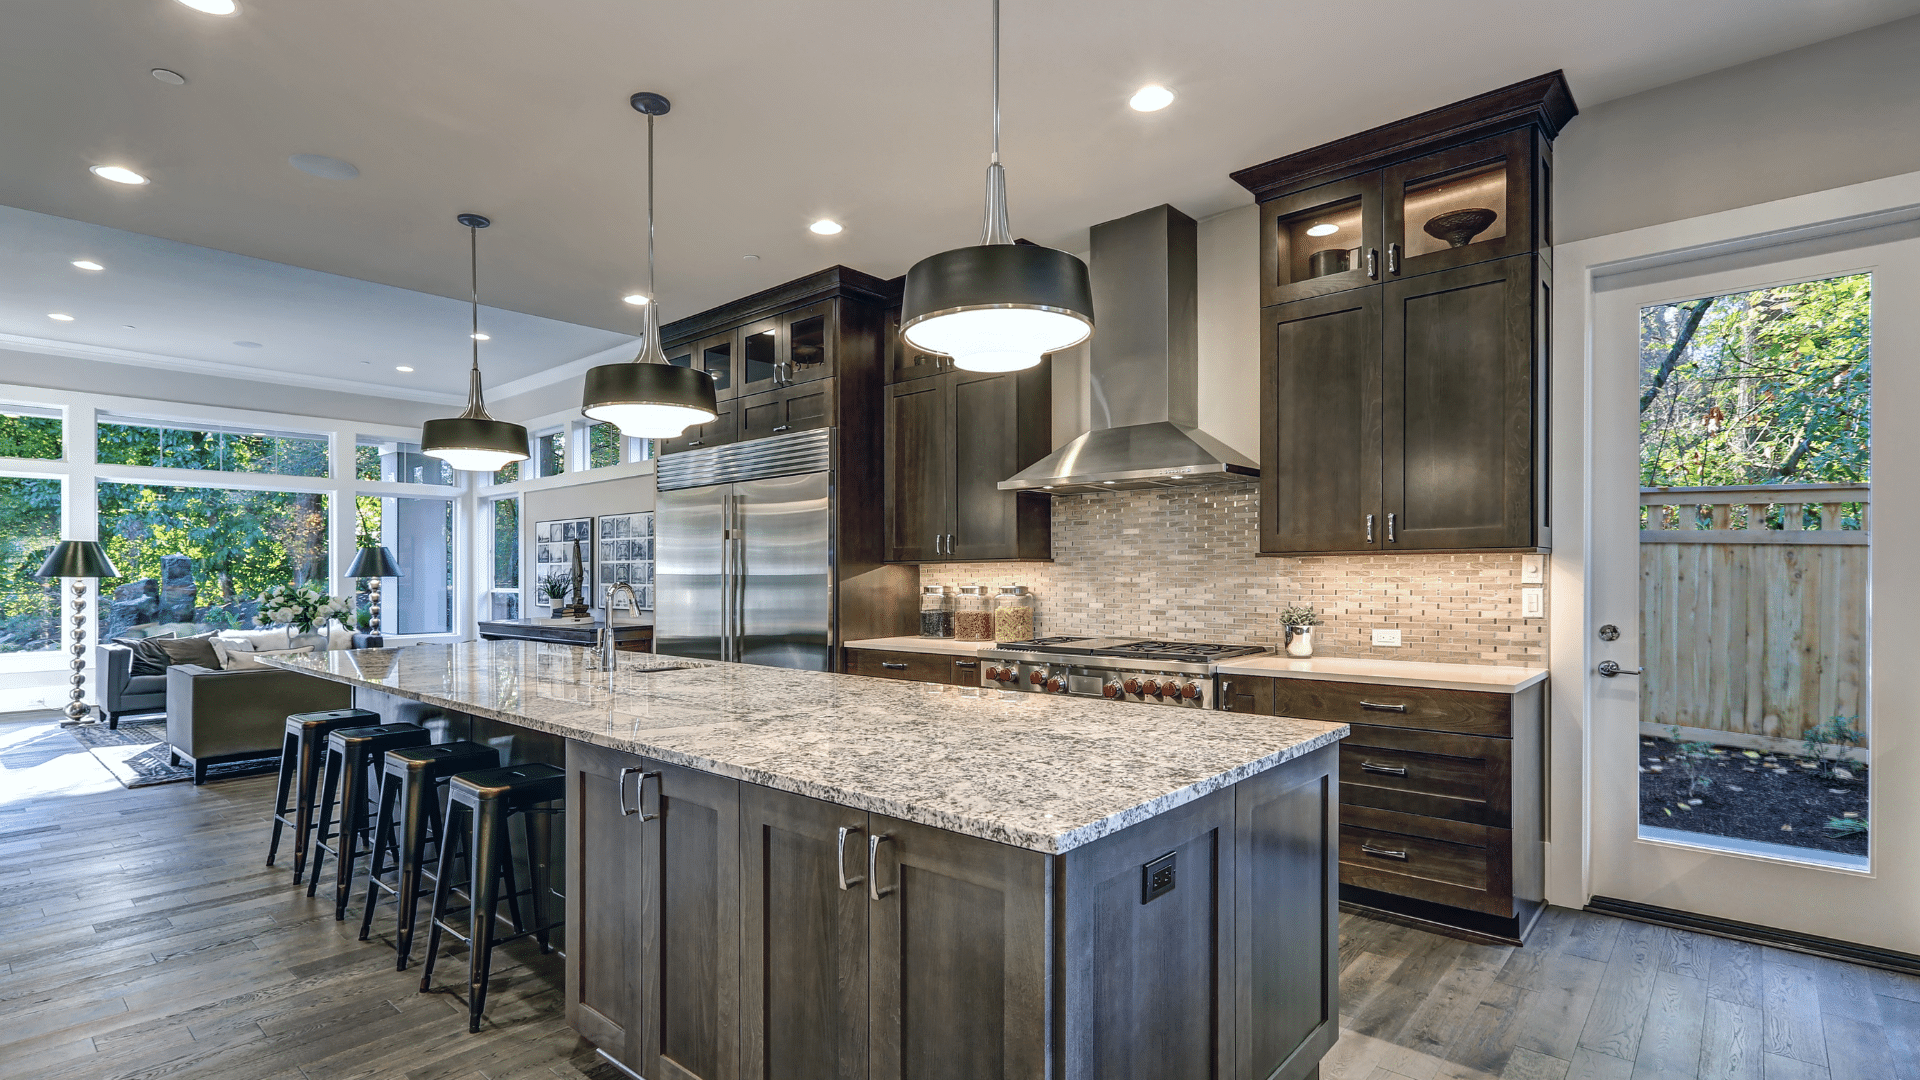 Spacious open-concept kitchen with grey shaker cabinets and granite countertop